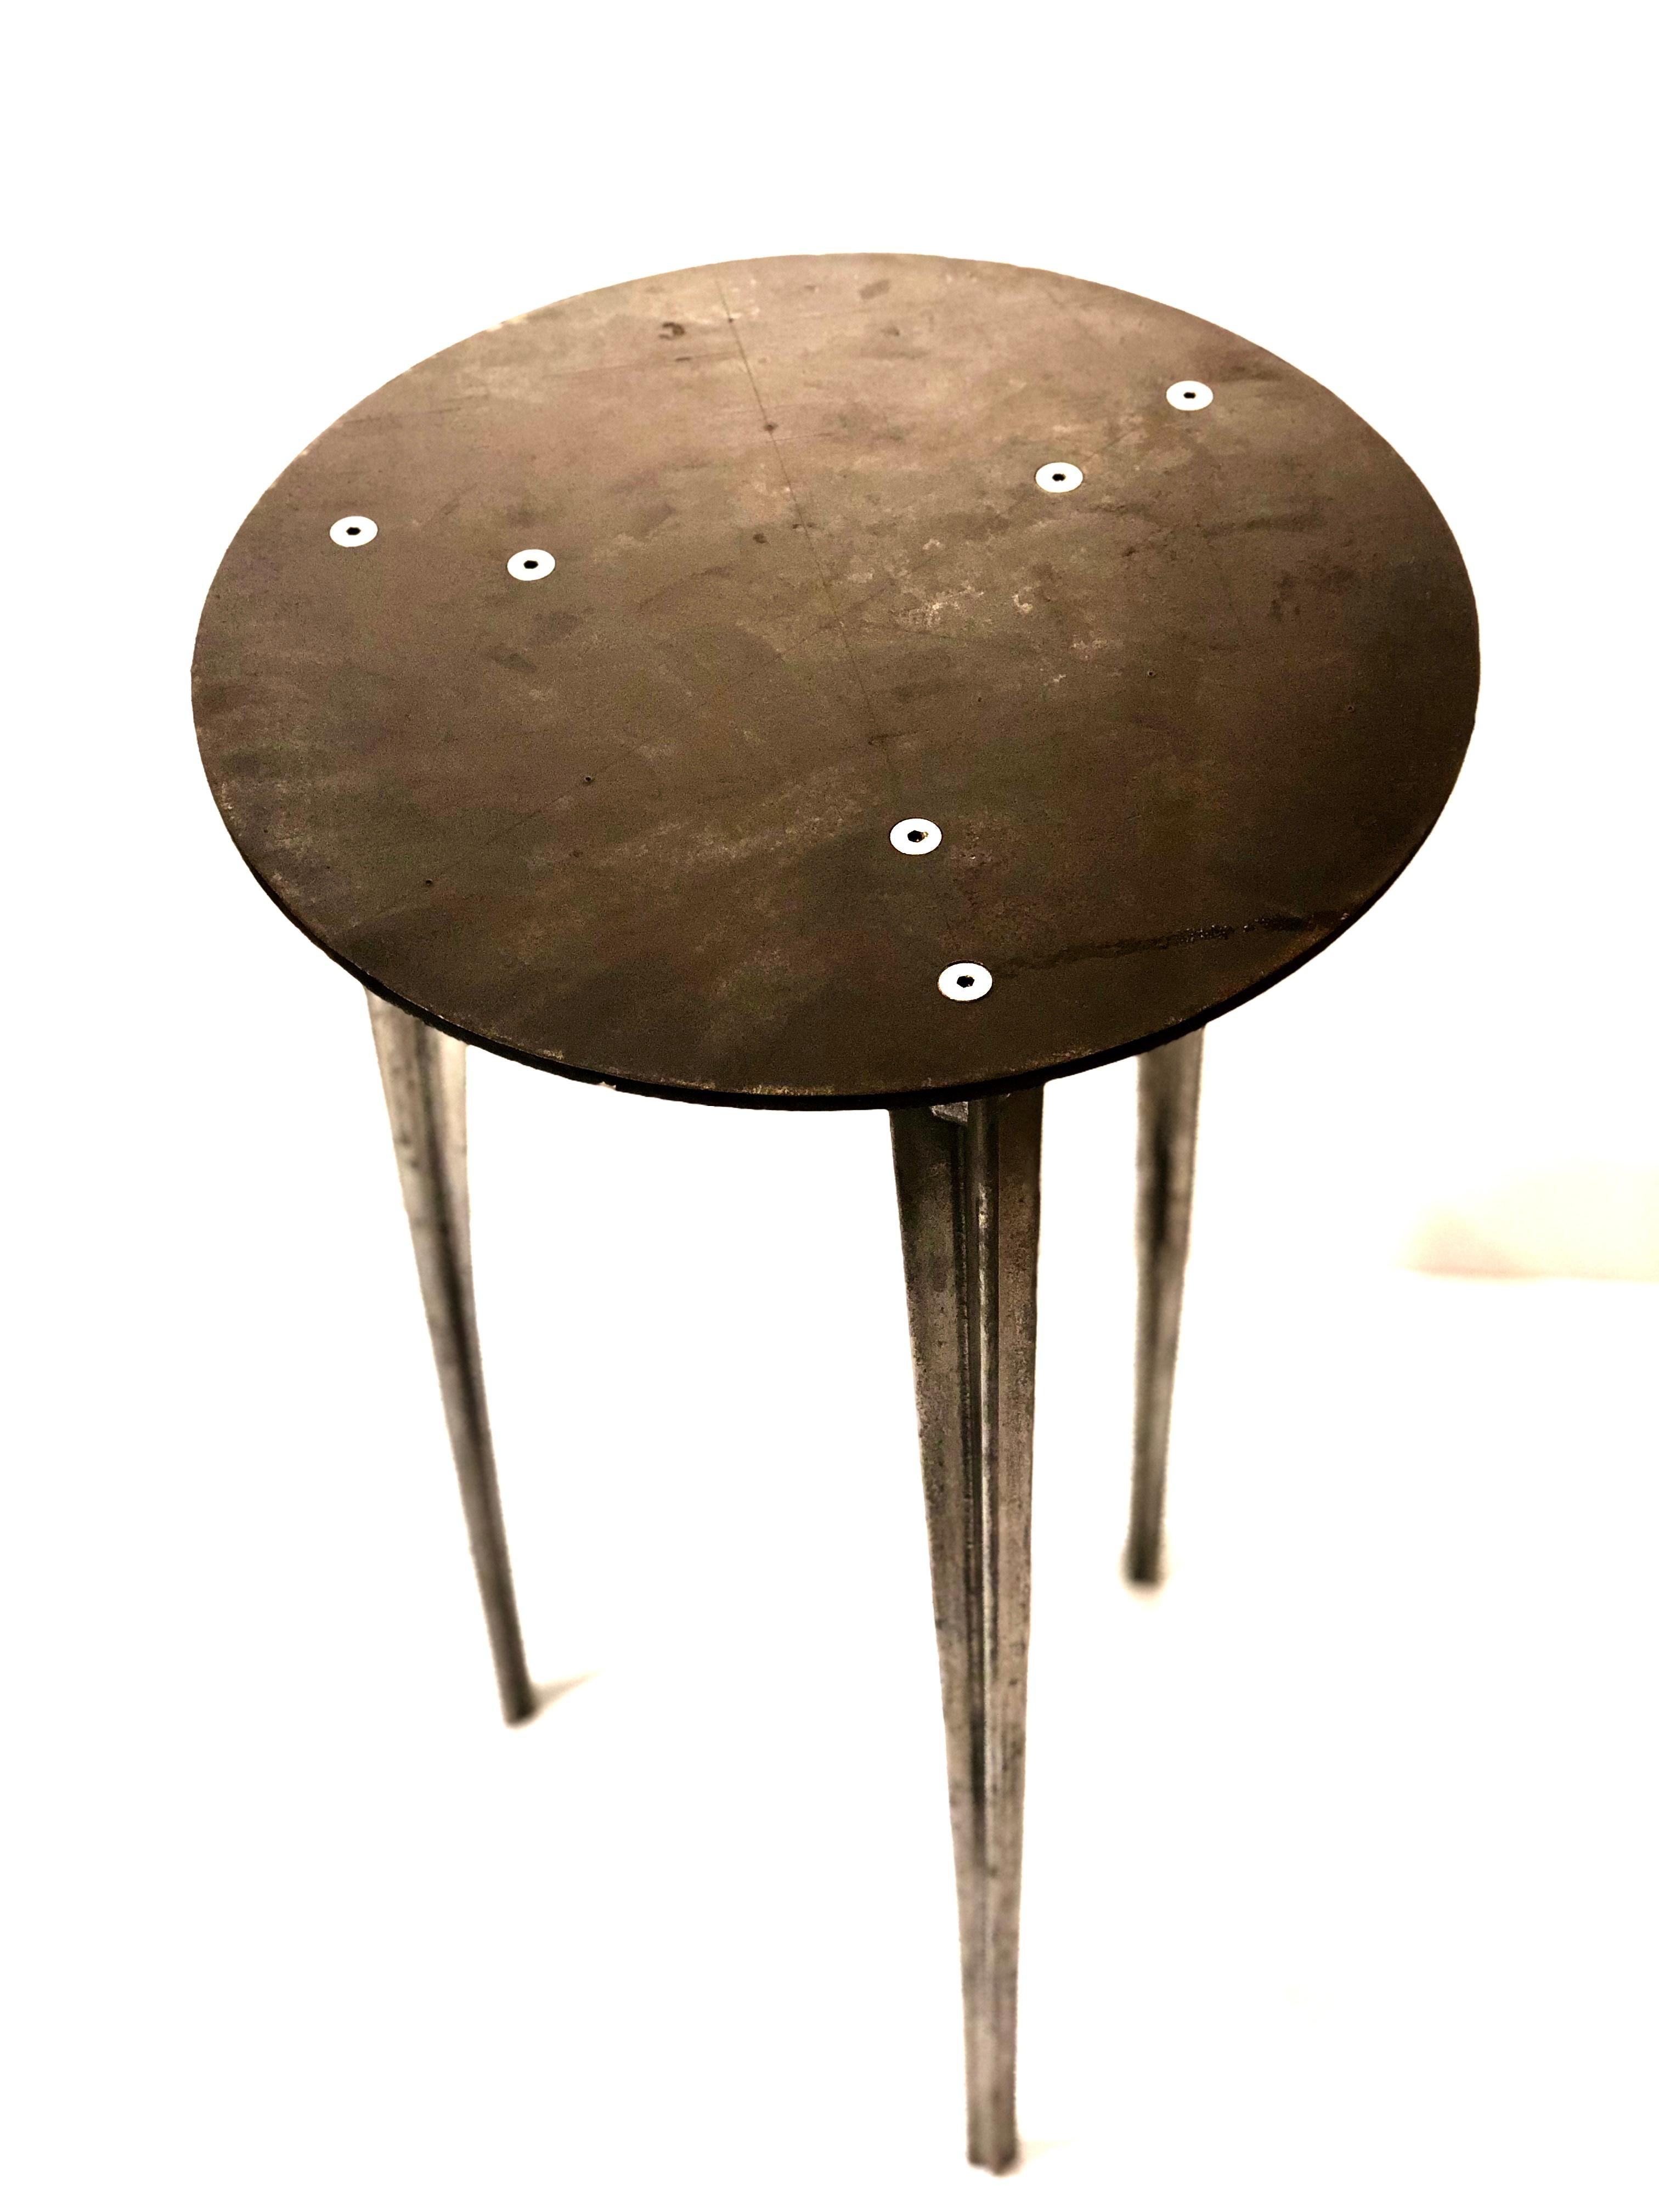 Rare tall cocktail table by Robert Josten solid raw patinated steel top with cast aluminum legs circa 1980s , all original condition very unusual to see this table , his designs are scarce and this one its very rare perfect for a corner table.